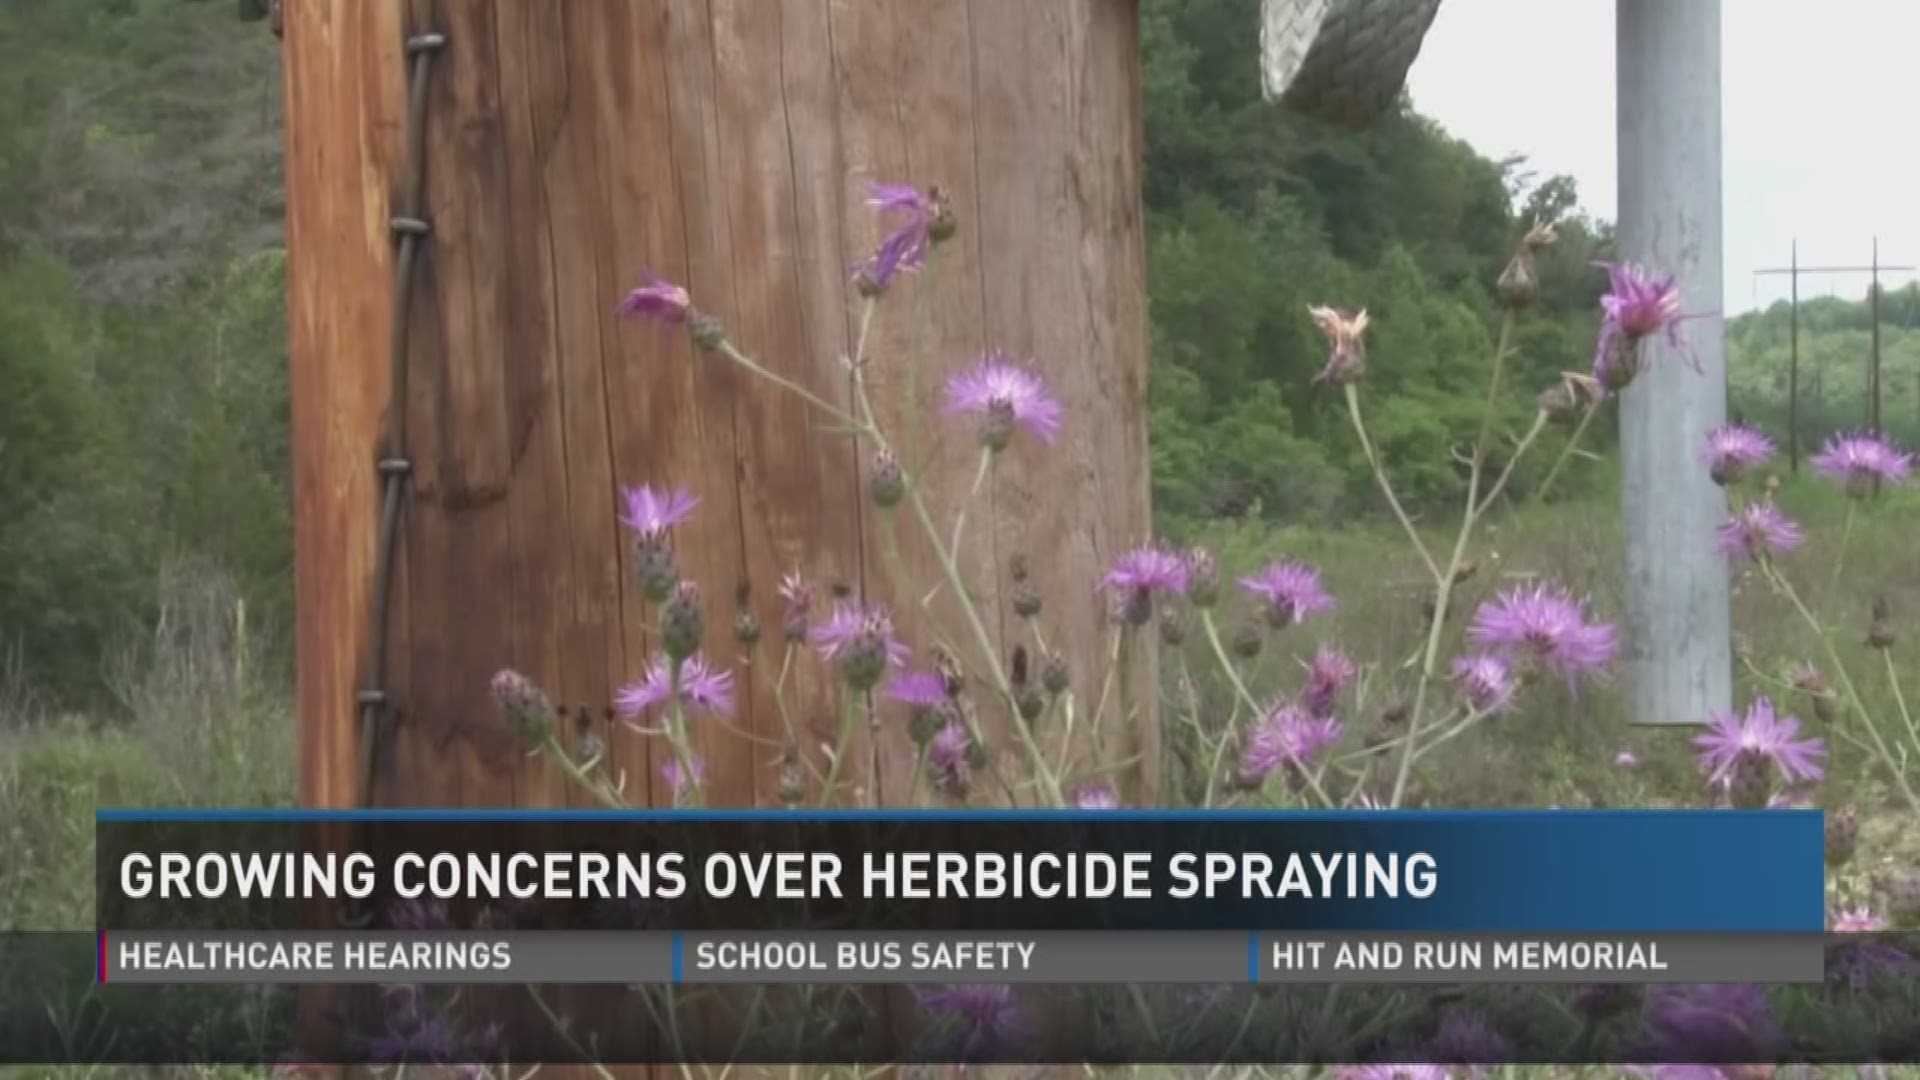 July 18, 2017: A chemical spray used by an East Tennessee electric company has people in several counties voicing concerns.